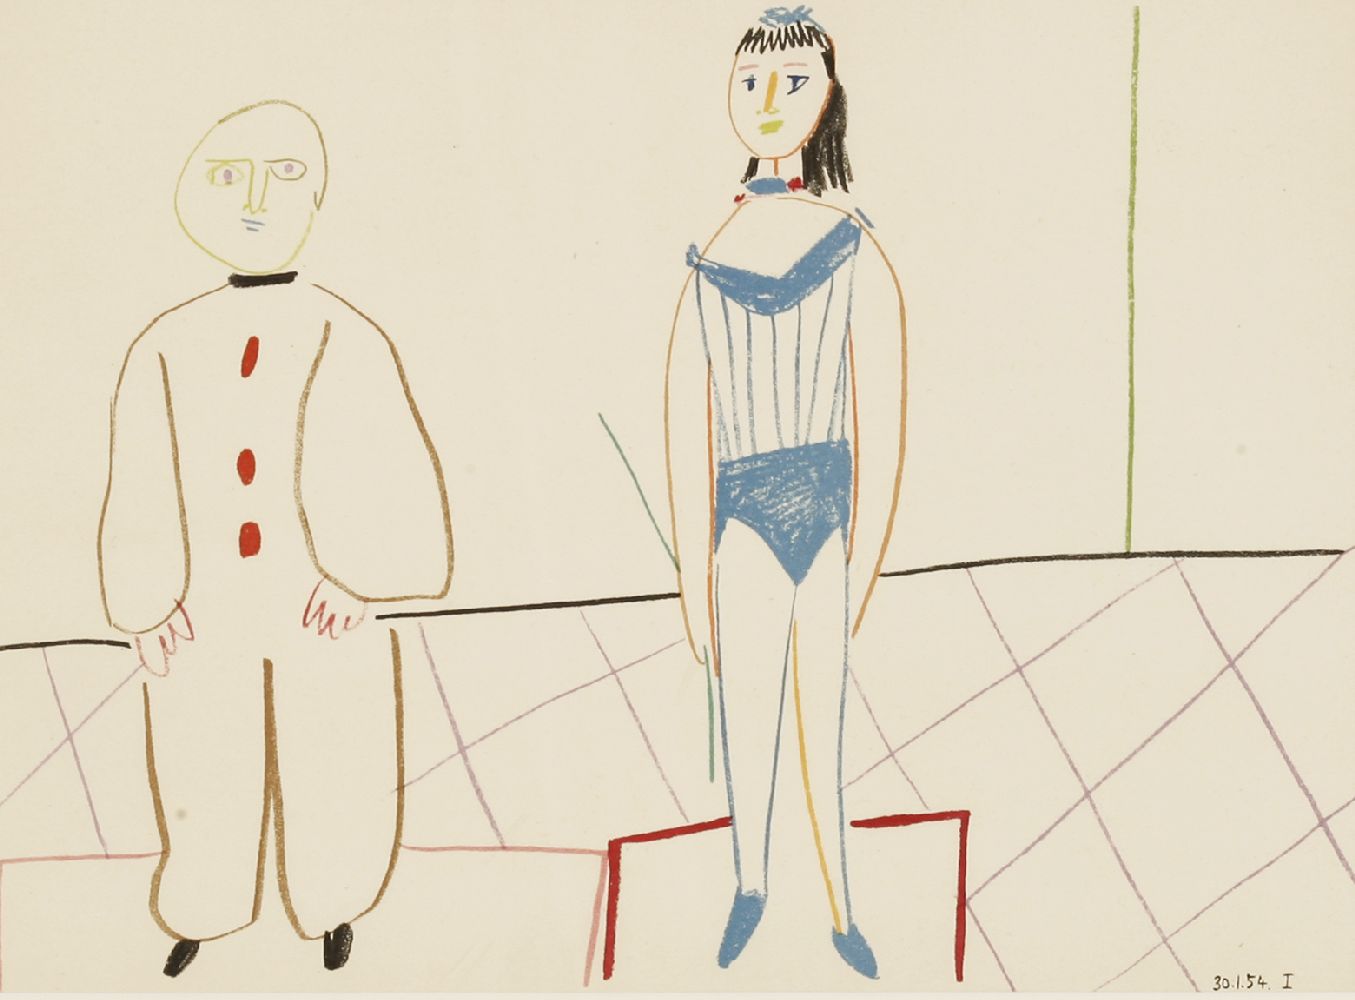 *After Pablo Picasso (Spanish, 1881-1973)30.1.54.I;29.1.54.VTwo lithographs printed in colours,